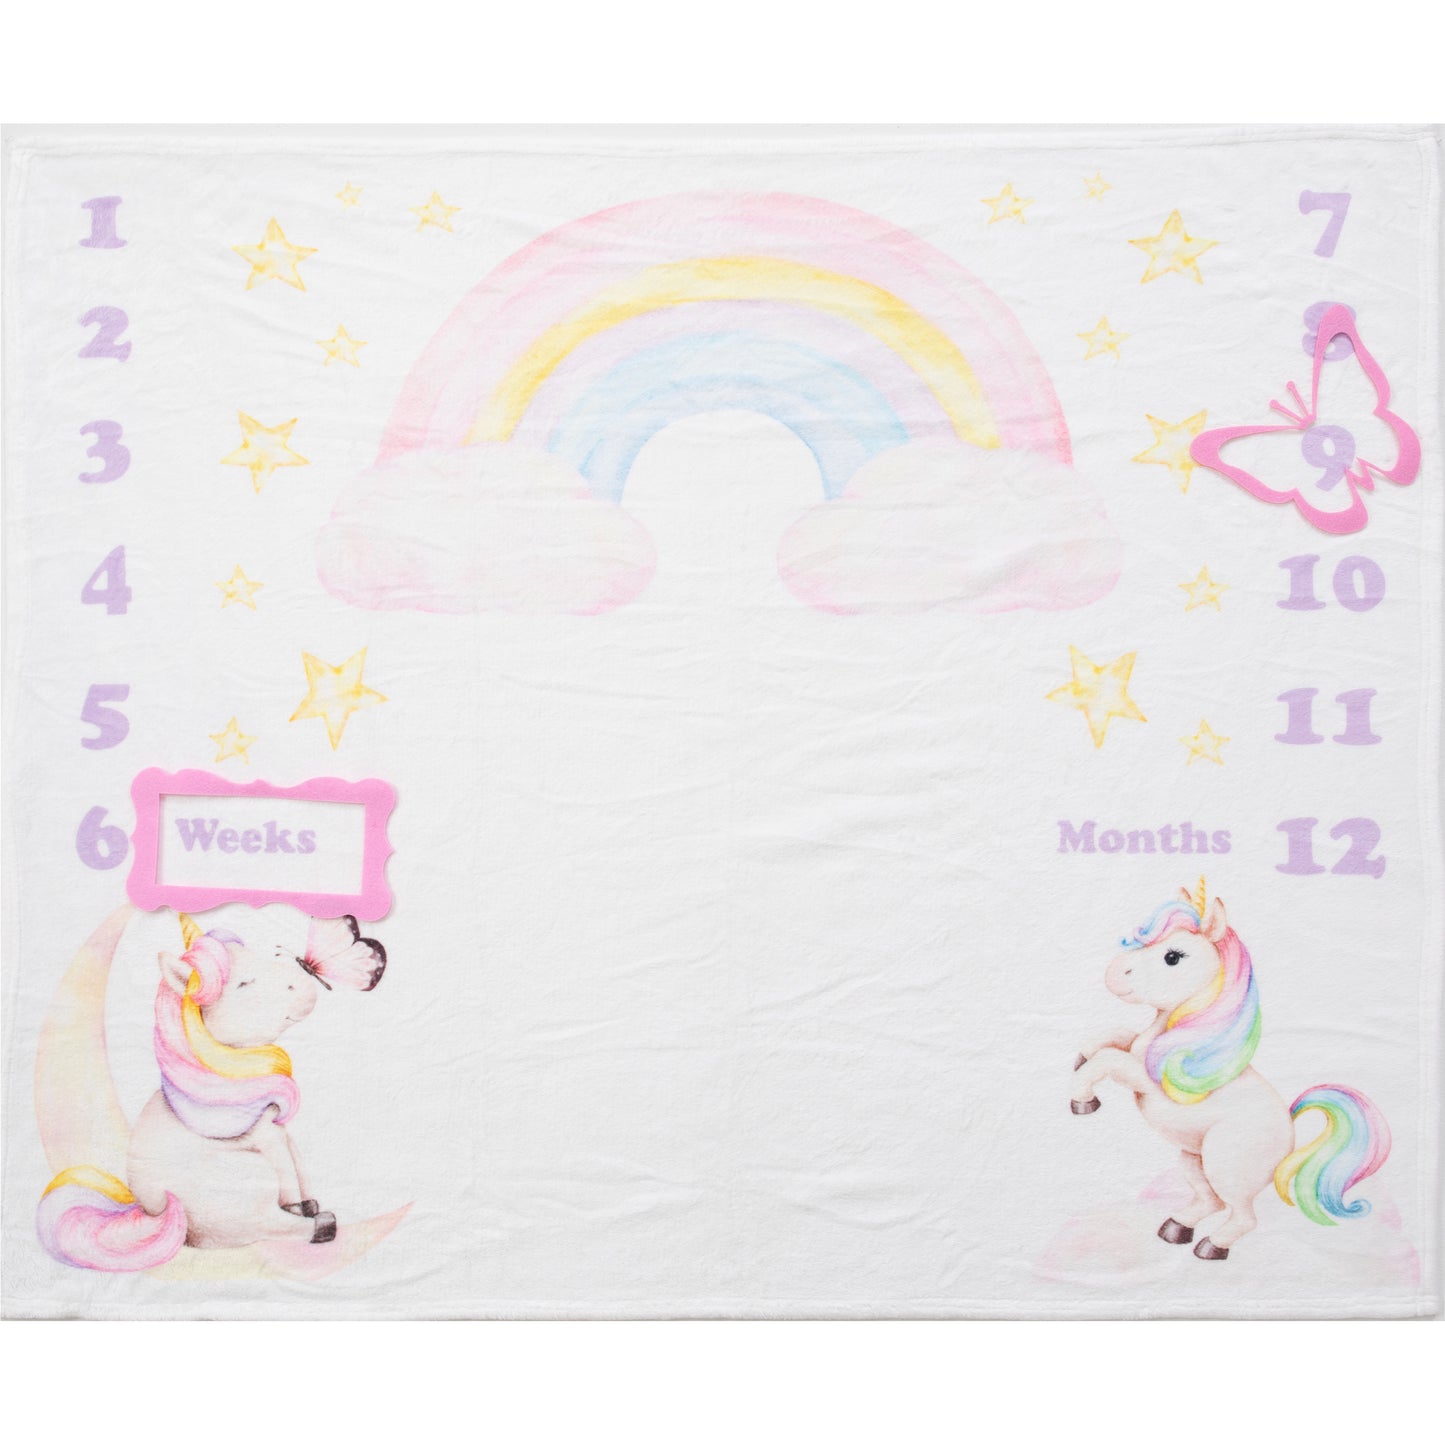 Our Rainbow Unicorn and Friends Baby Milestone Blanket is crafted from soft, breathable, and durable fabric, ensuring your baby's comfort during each photoshoot. It's designed to withstand the test of time while capturing the extraordinary moments of your baby's first year.